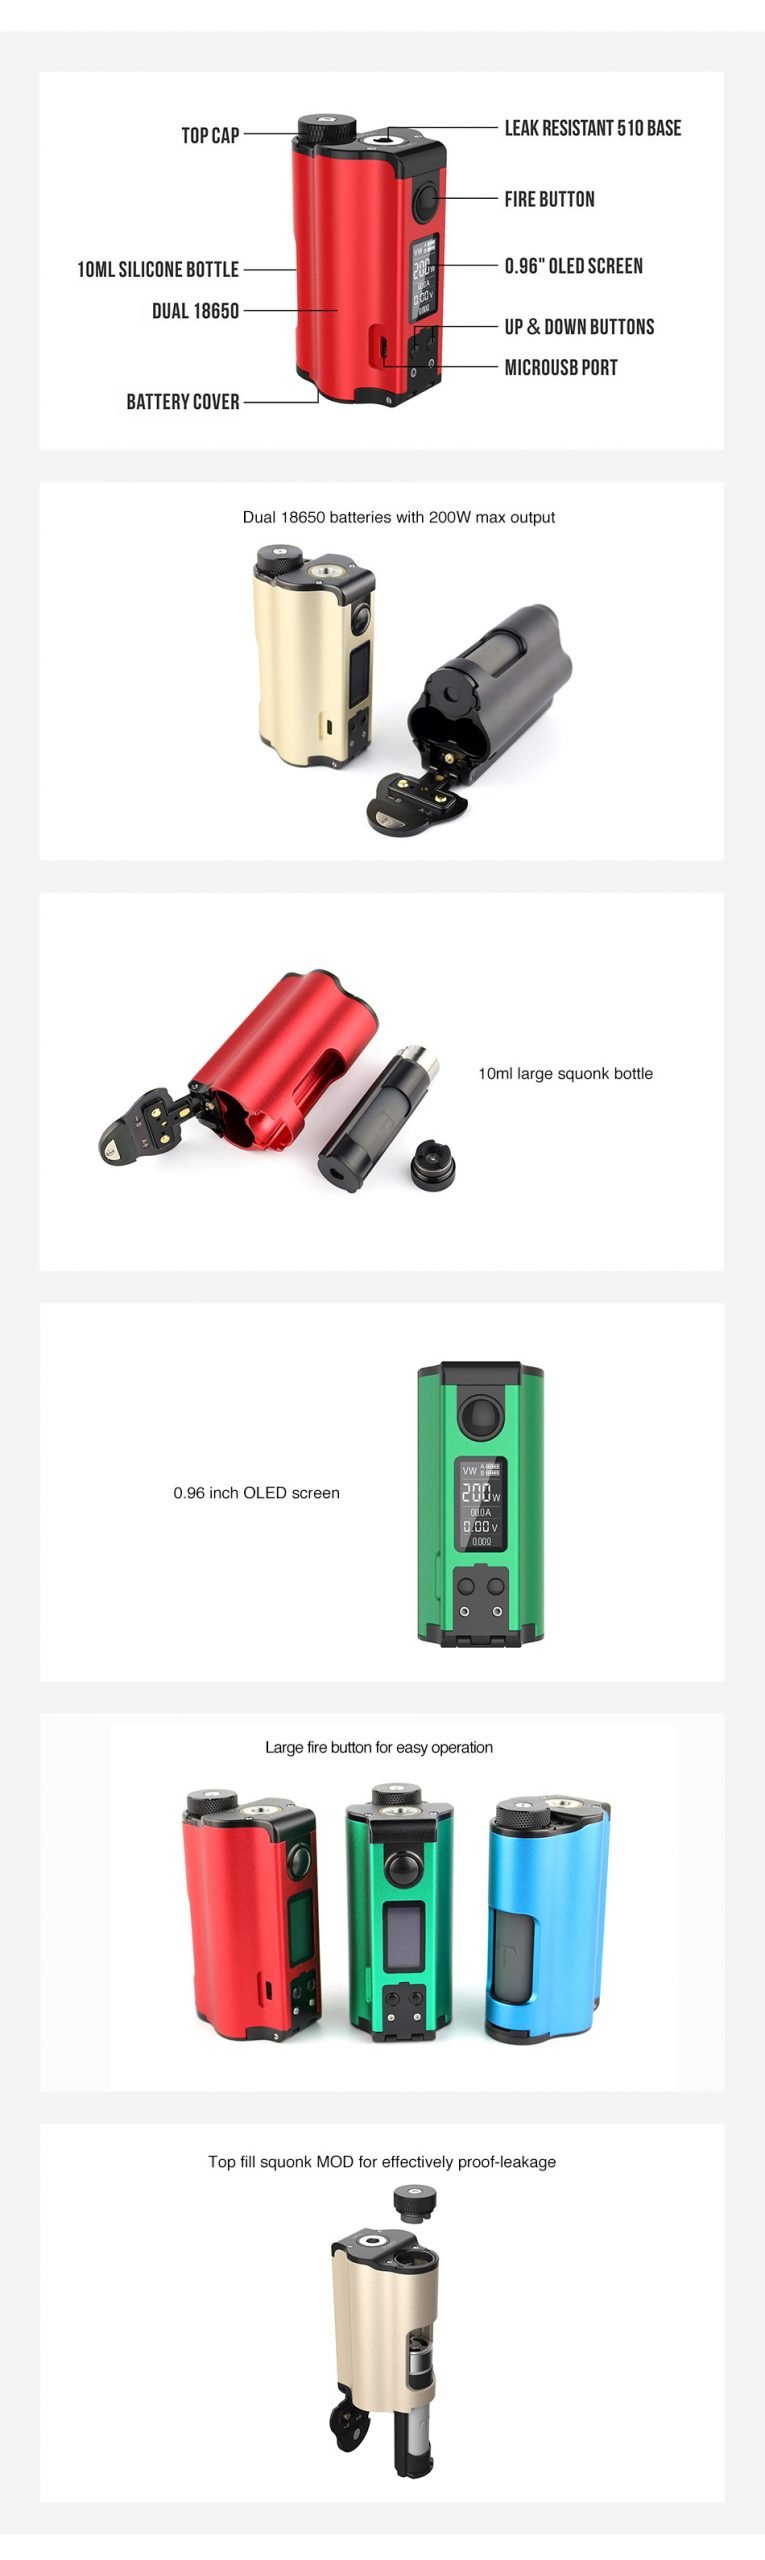 Series of labelled diagrams and Deconstructions of different features and parts of the Dovpo Topside Dual including the OLED screen, fire button, battery, squonk bottle and leakproof technology. 